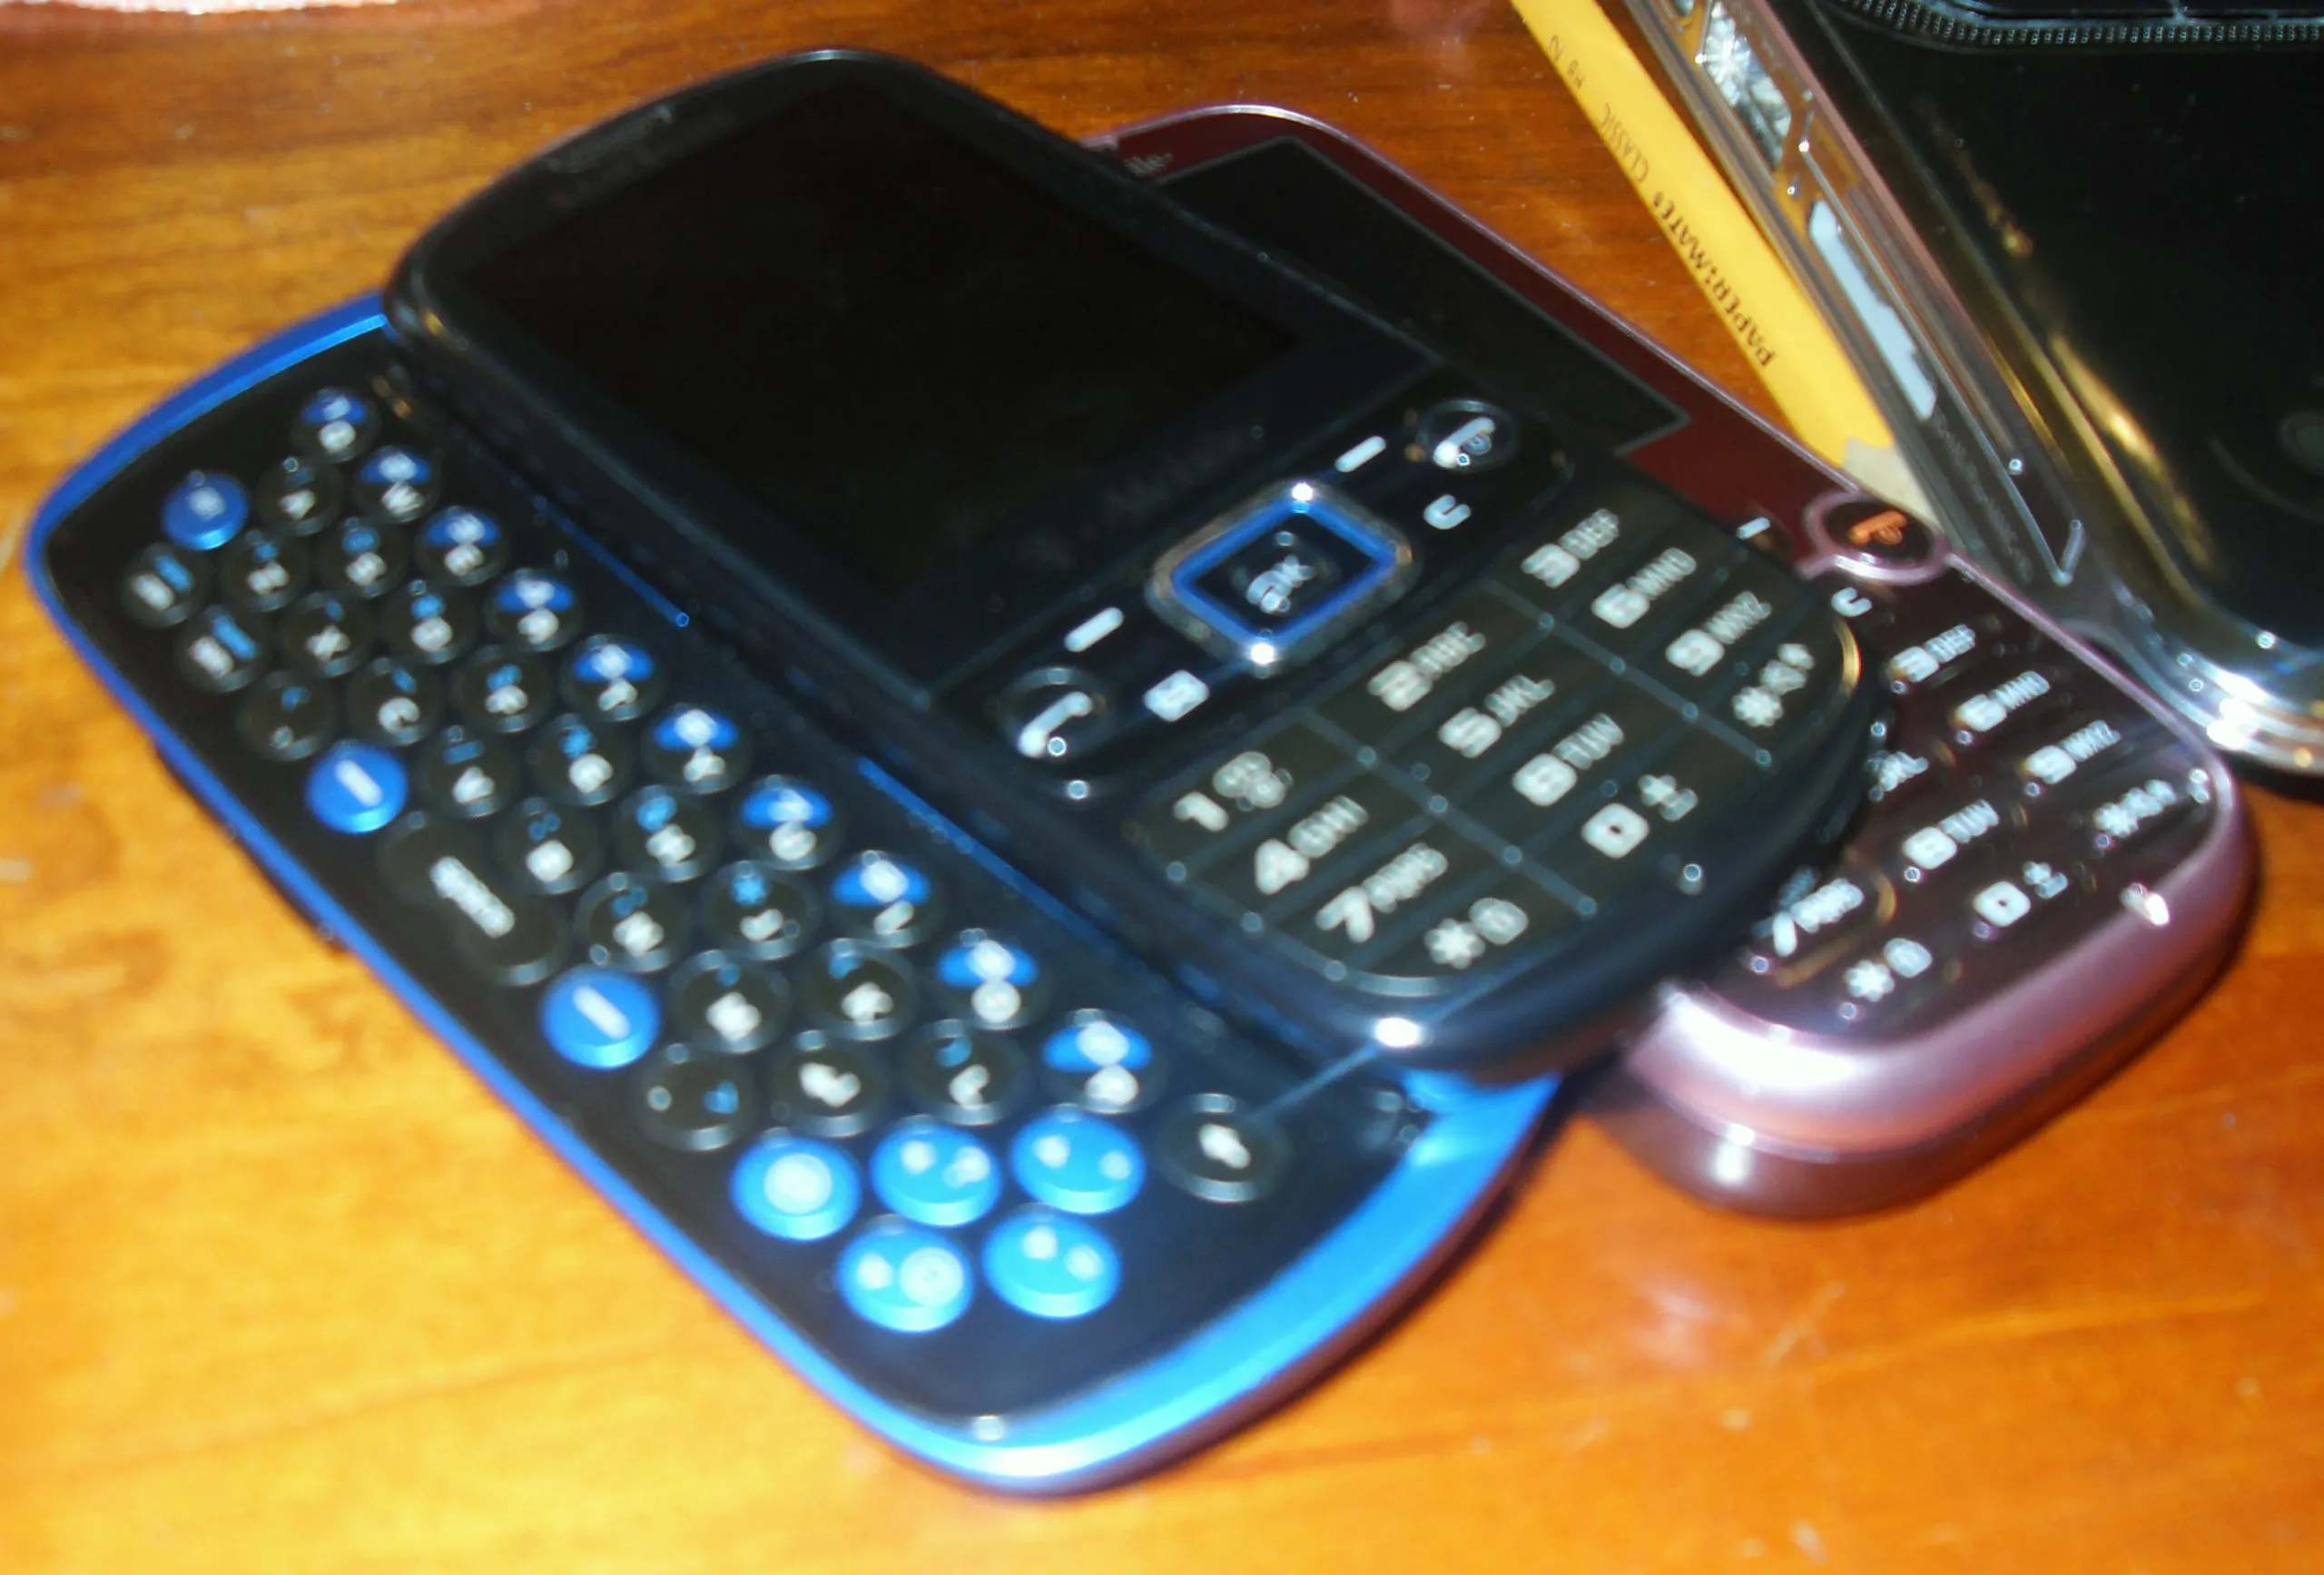 Blurry photograph from 2011 of two Samsung Gravity 2 phones.